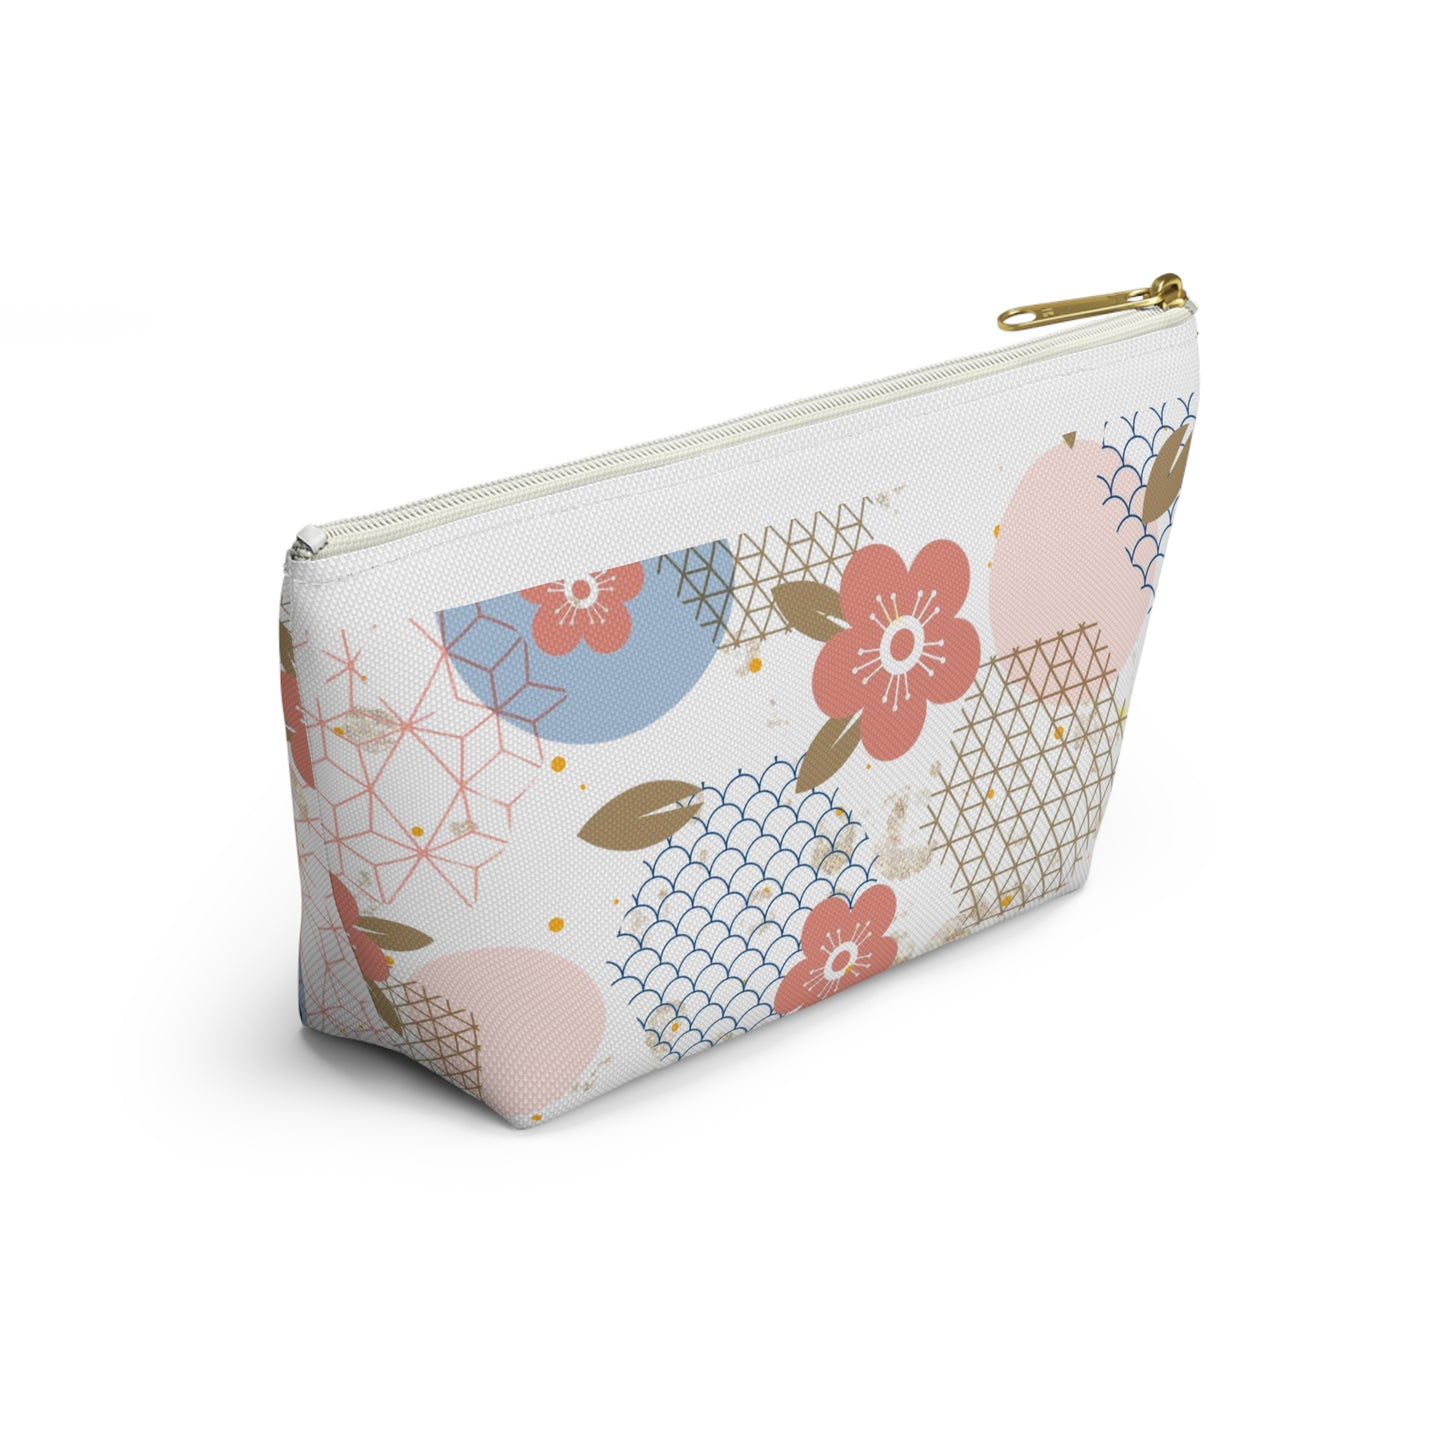 Accessory Pouch - Cherry Blossom Pattern